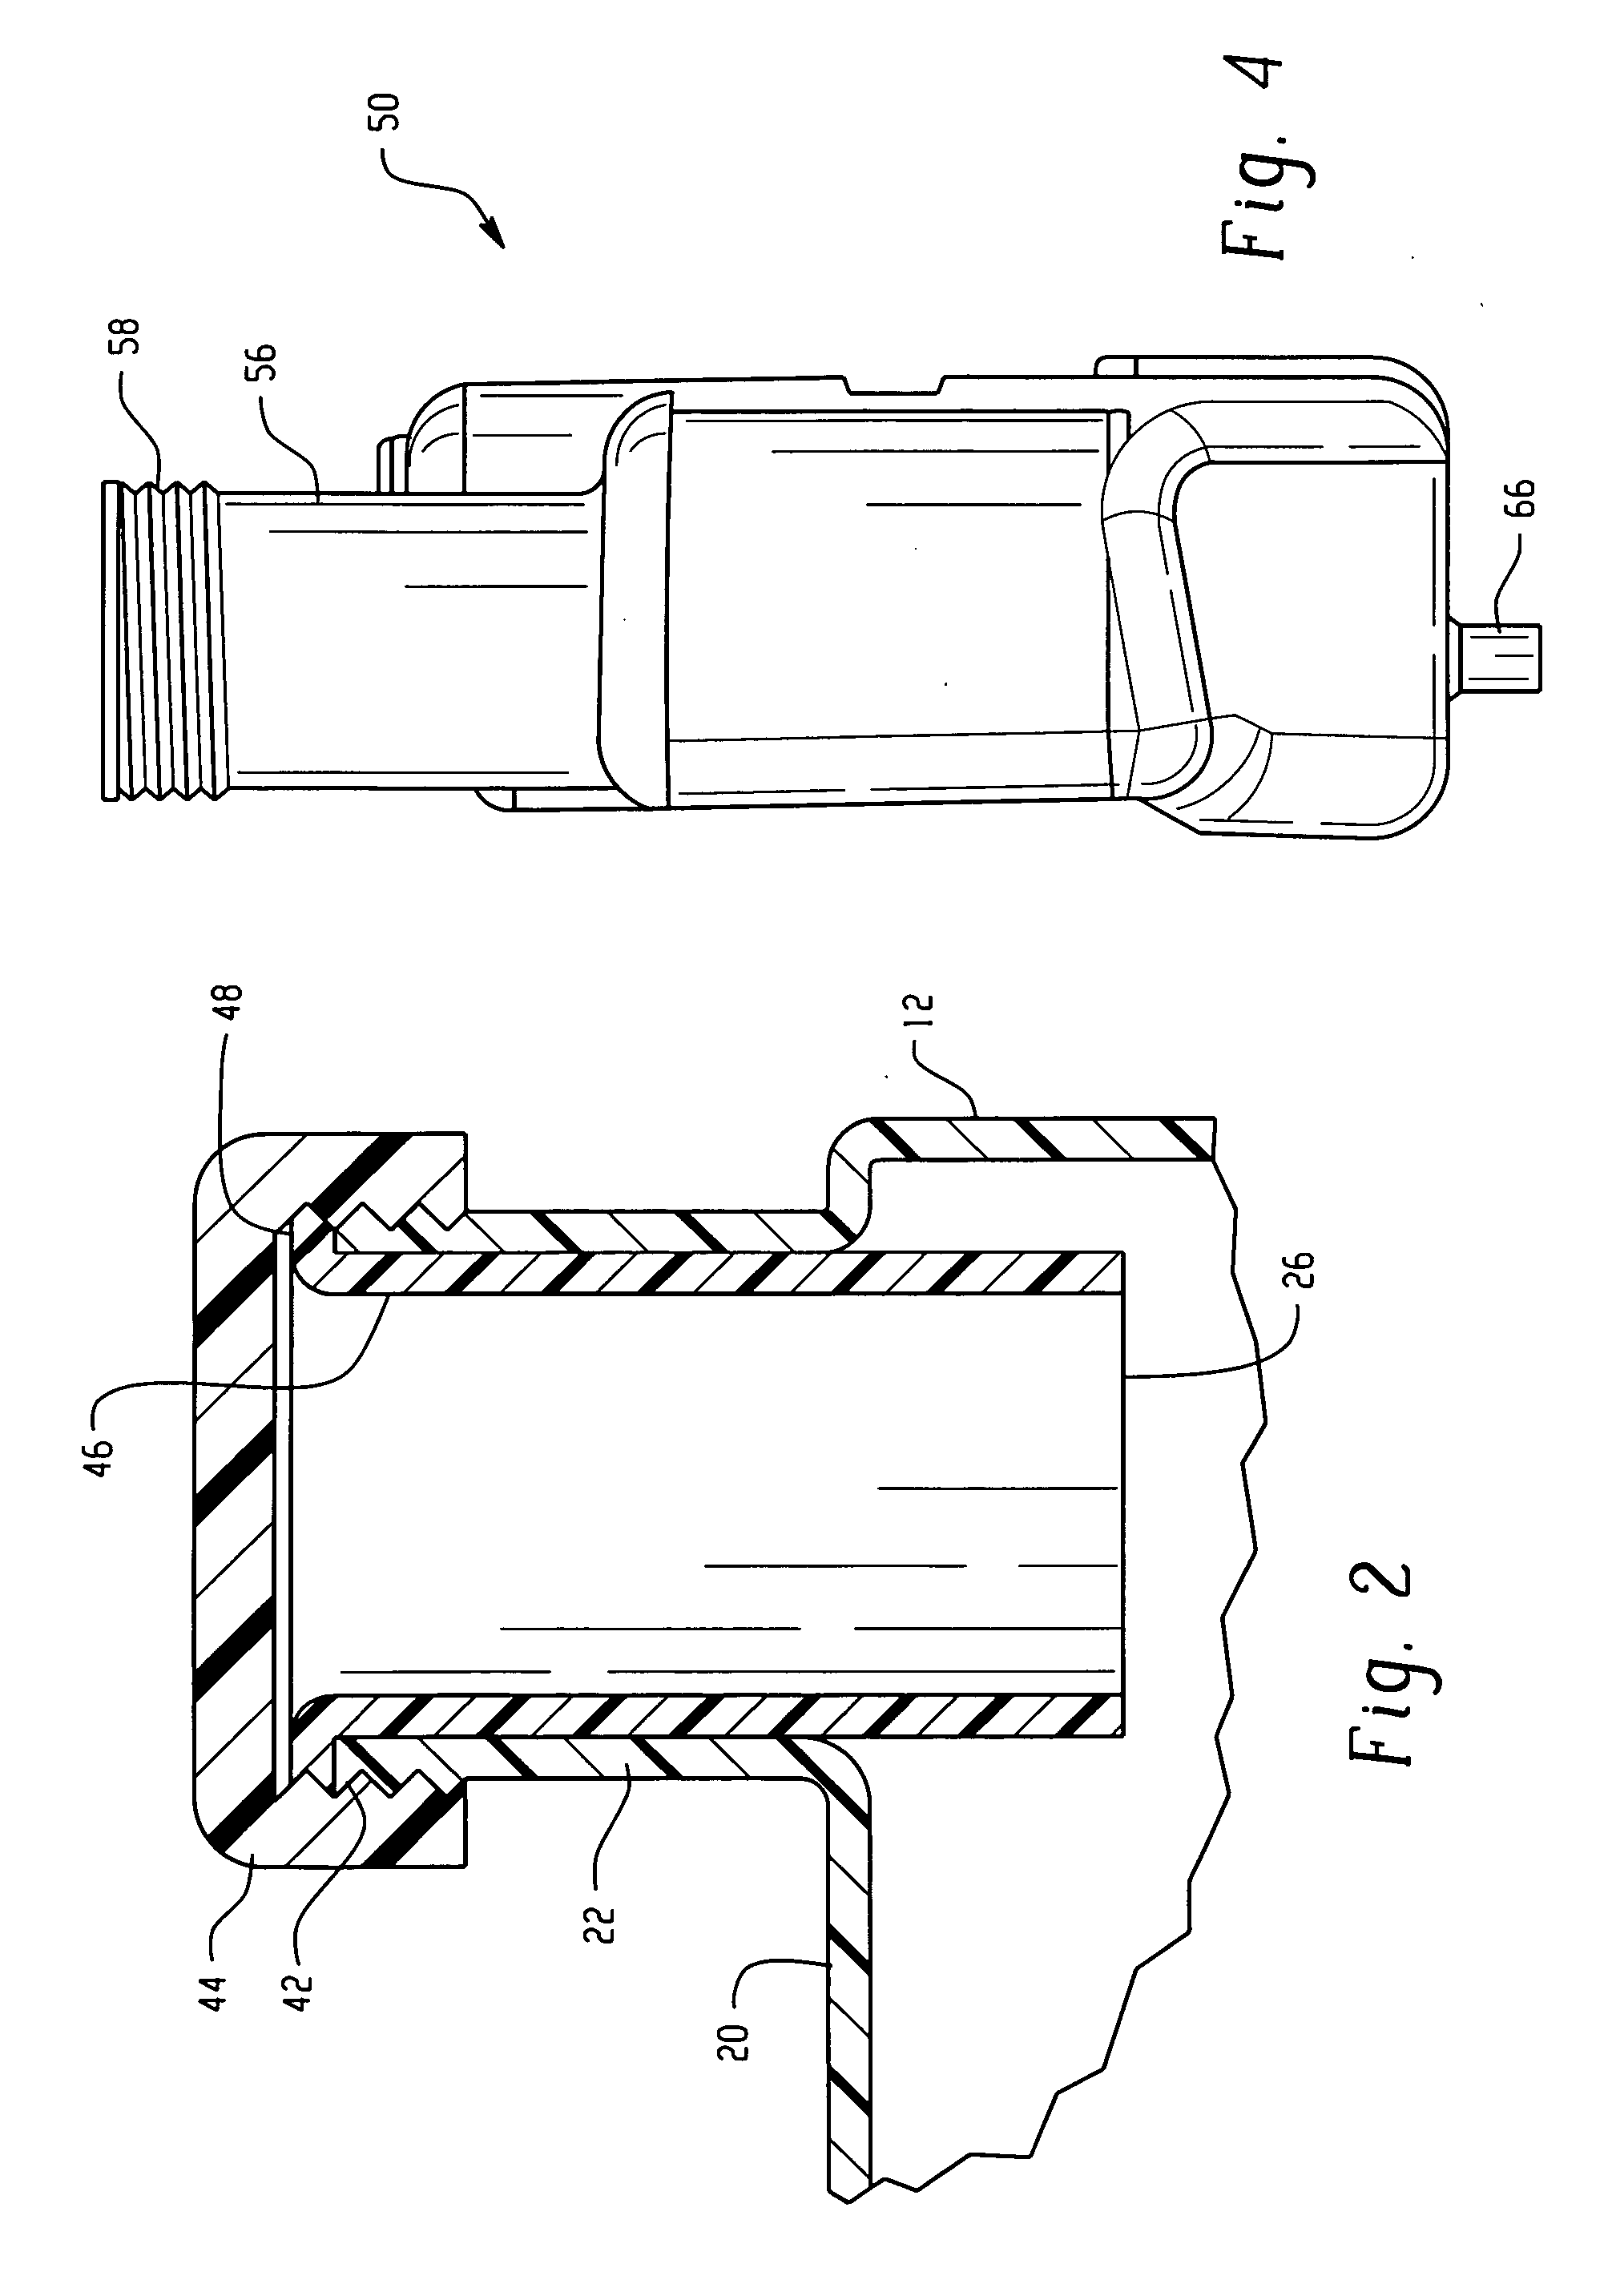 System and method for controlling fuel vapor emmission in a small engine